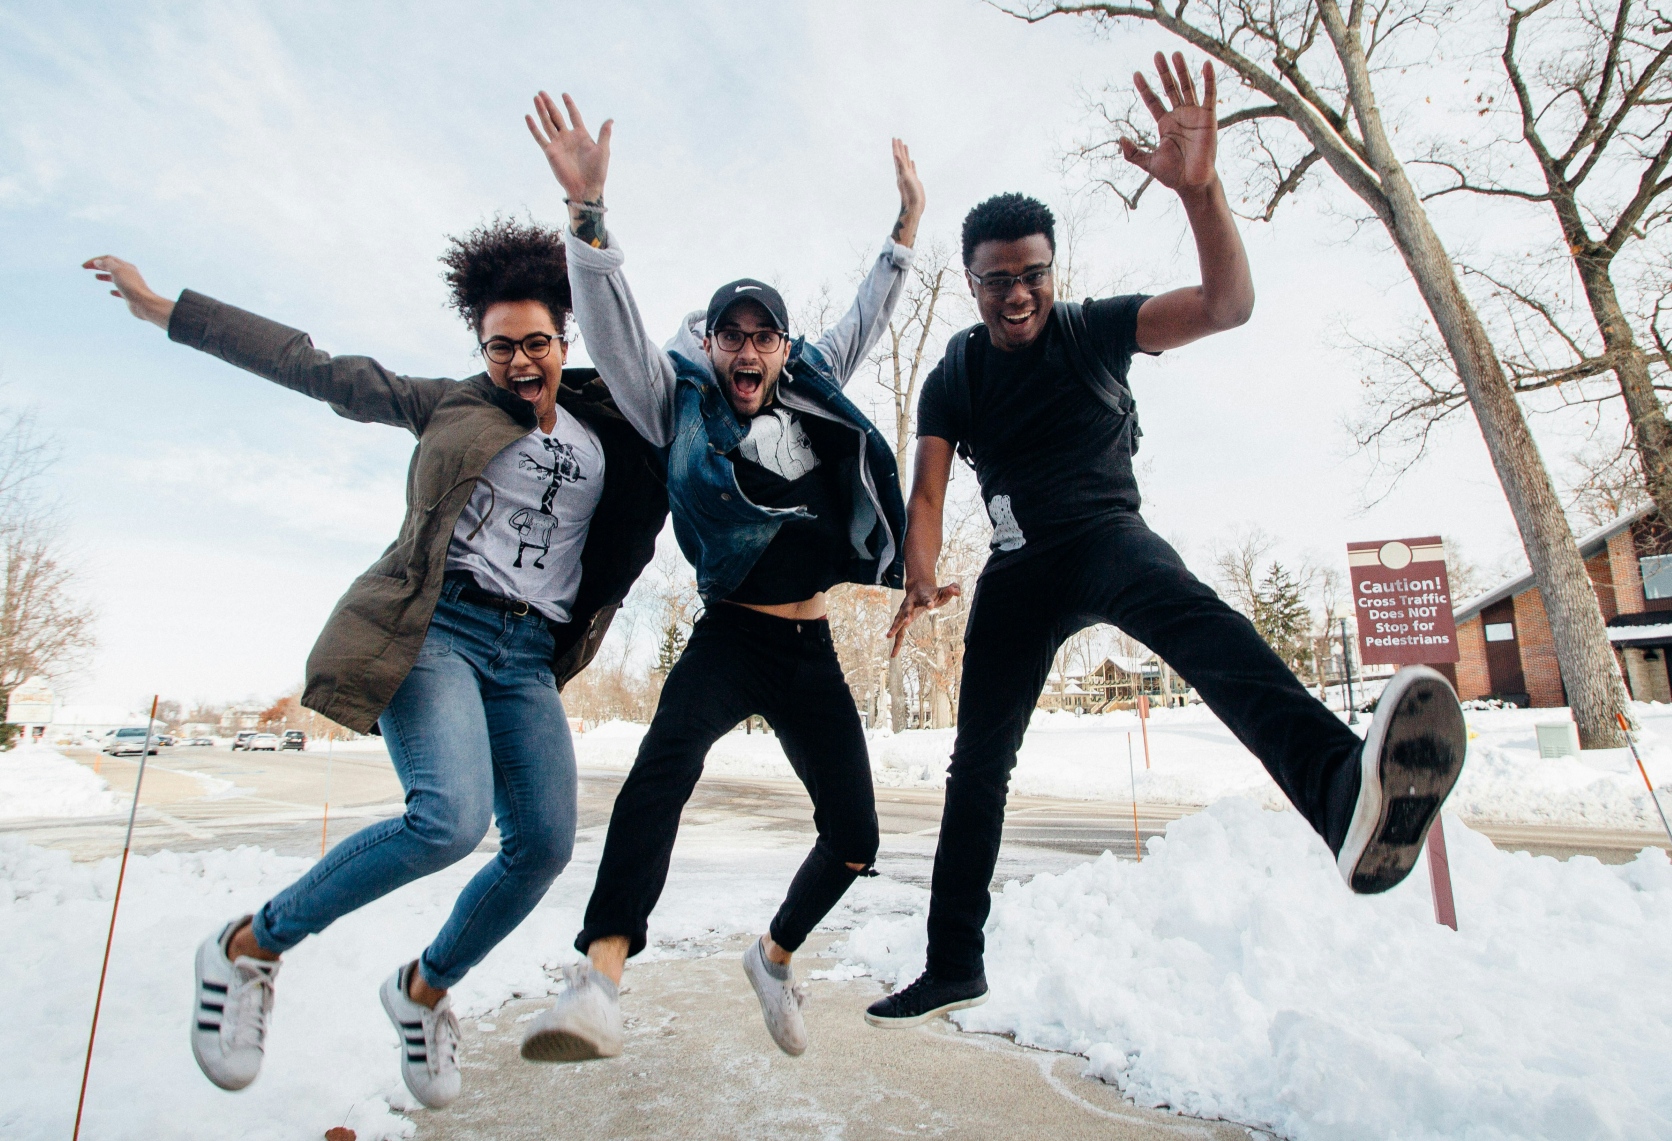 three people jumping outdoors on a snowy day